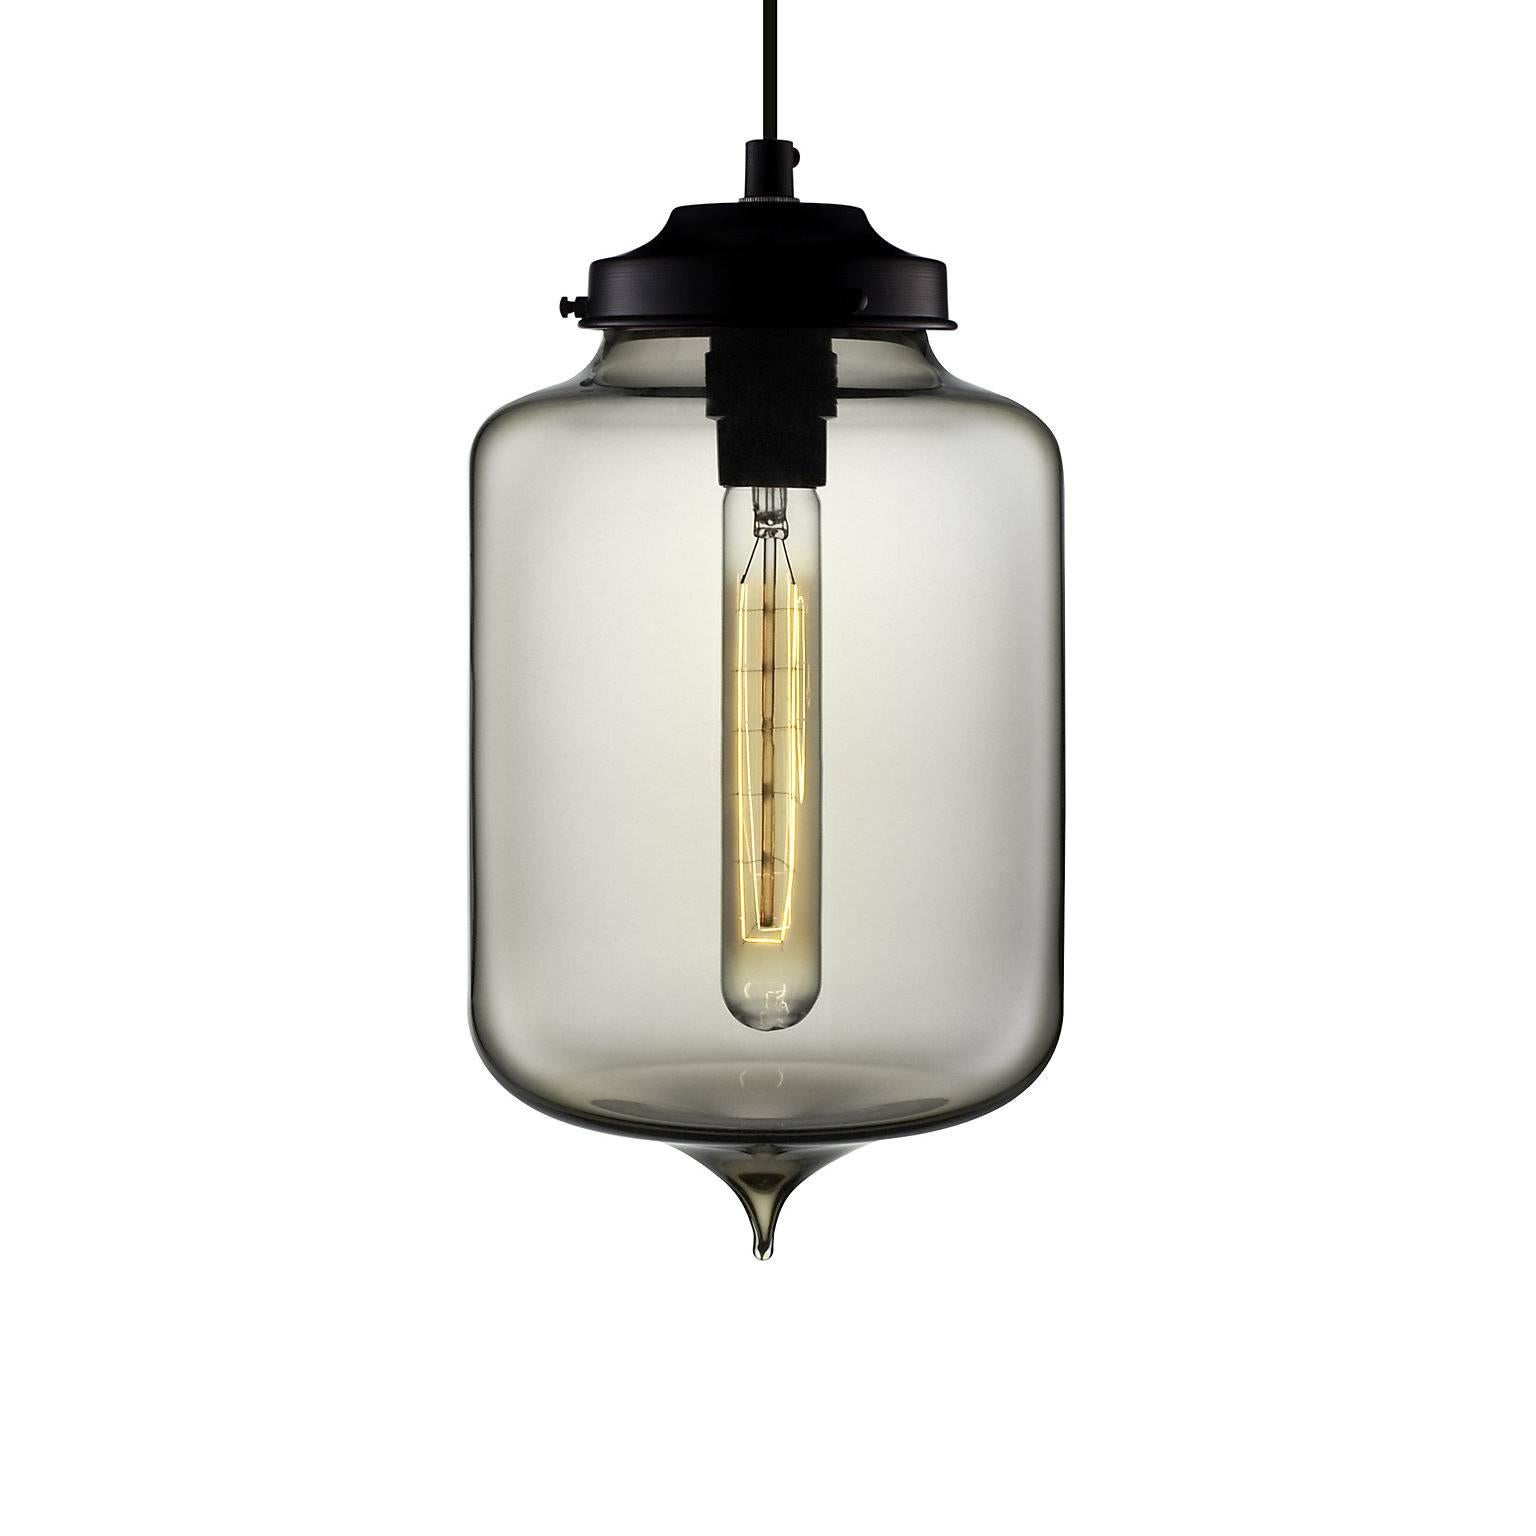 Born from the intricacies of Moorish architecture, the slender Turret and its wider counterpart, the Minaret, feature a hand-pulled tear-drop shape that reflects refined beauty. Every single glass pendant light that comes from Niche is handblown by